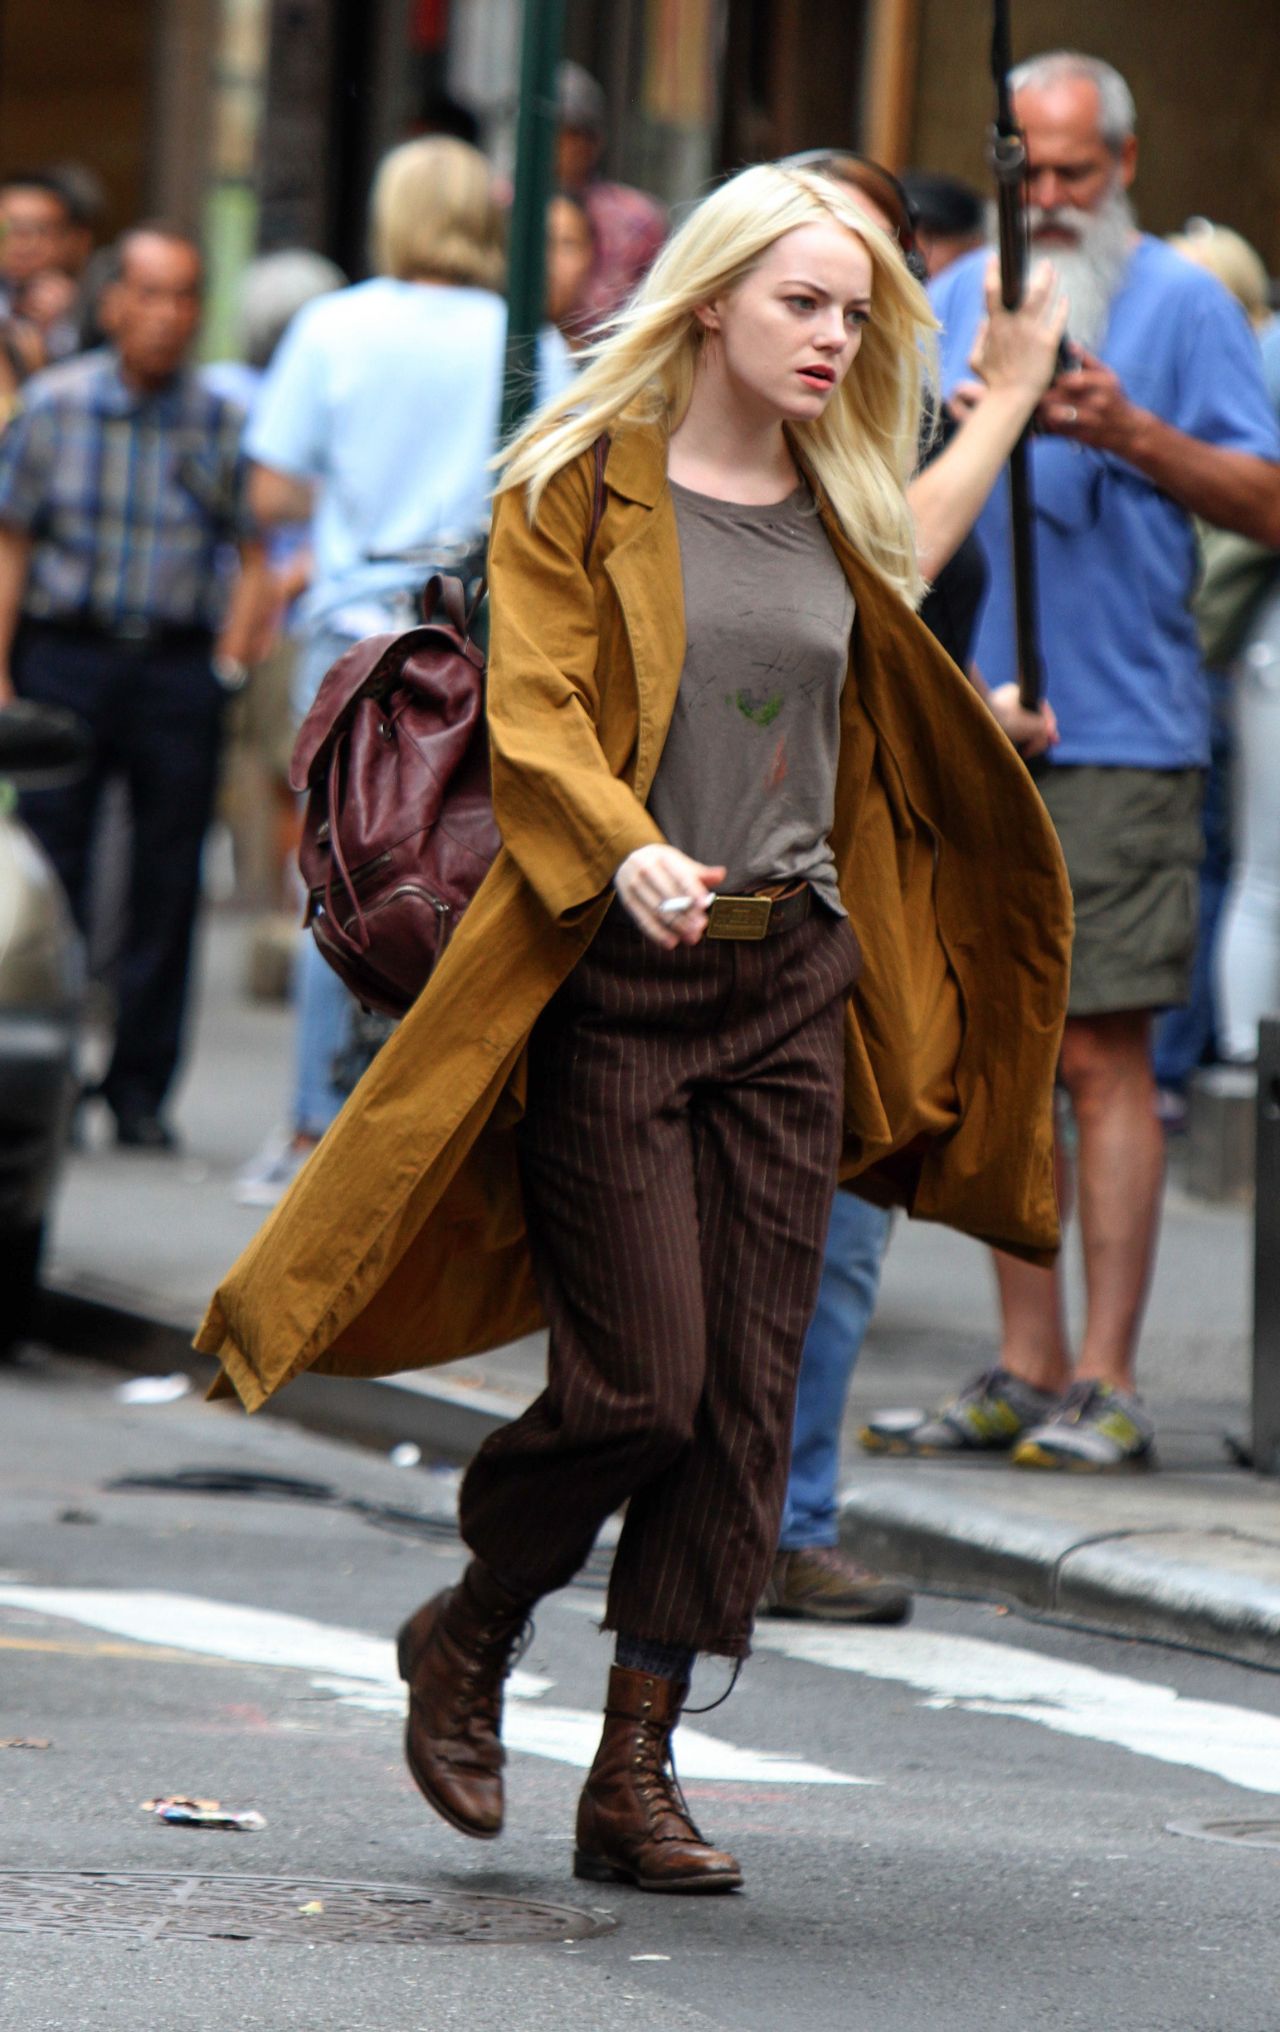 emma-stone-shooting-scenes-on-the-set-of-maniac-in-nyc-08-15-2017-14.